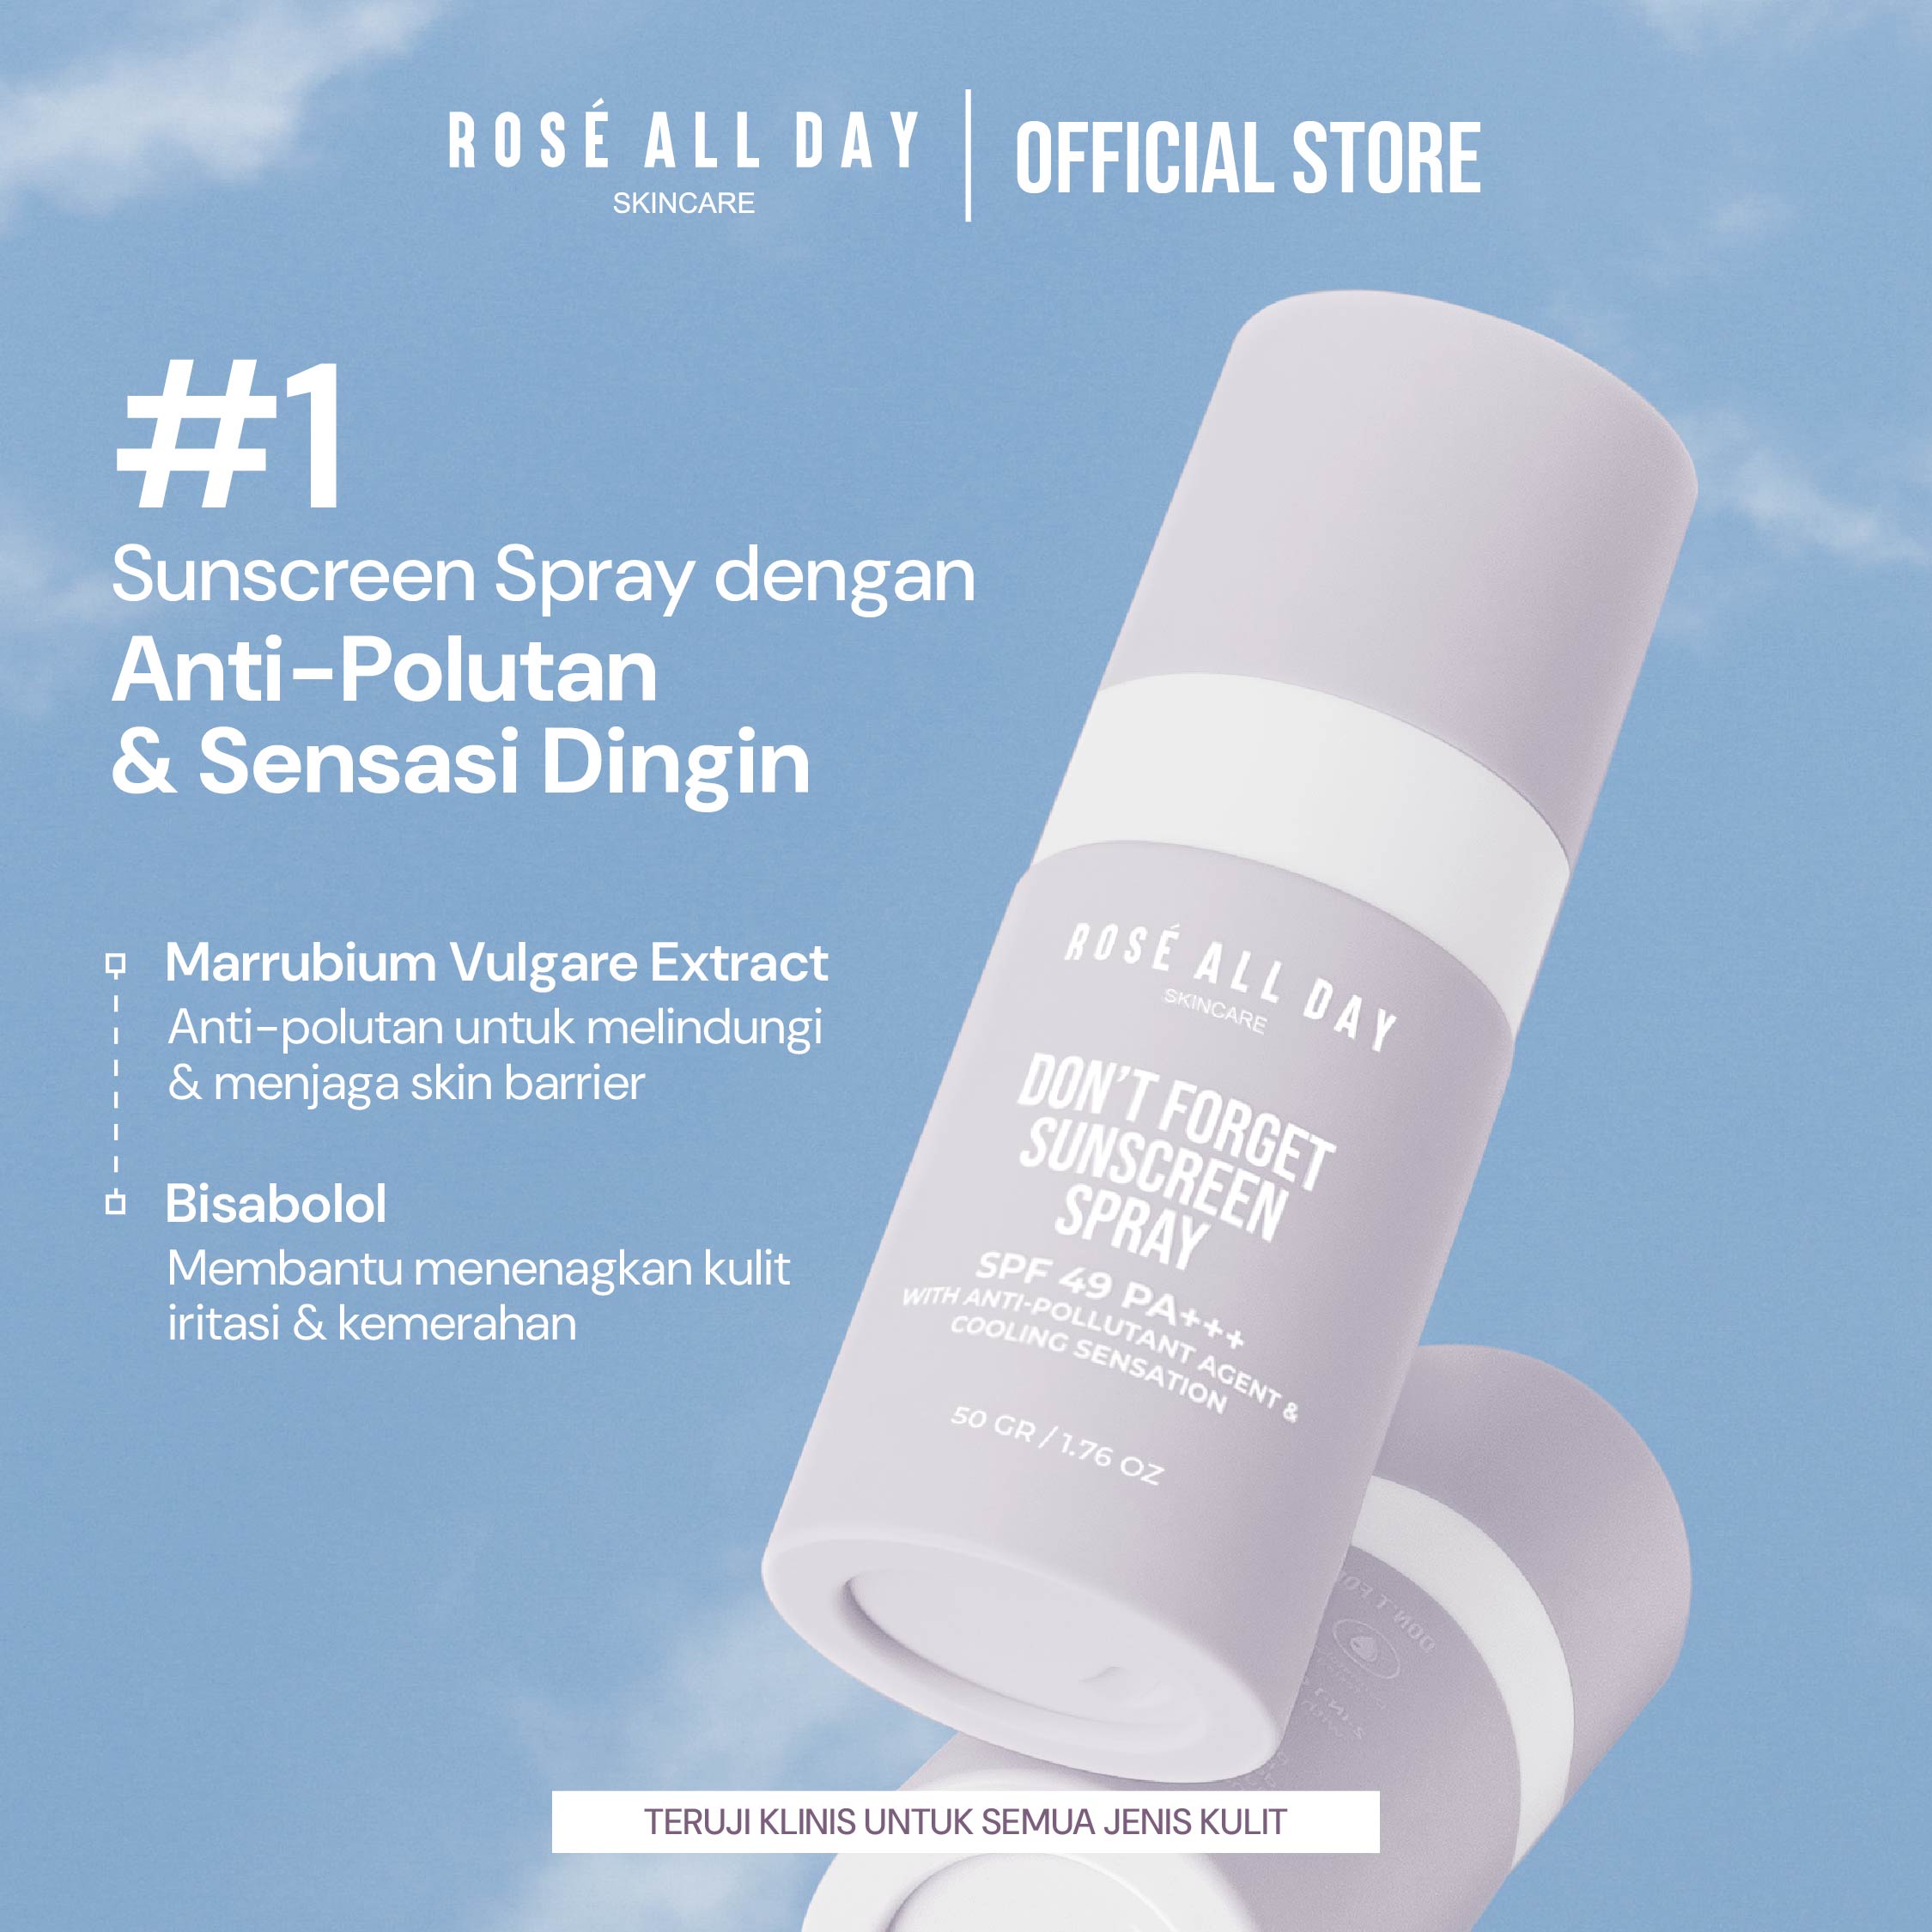 [NEW] Rosé All Day Don't Forget Sunscreen Spray